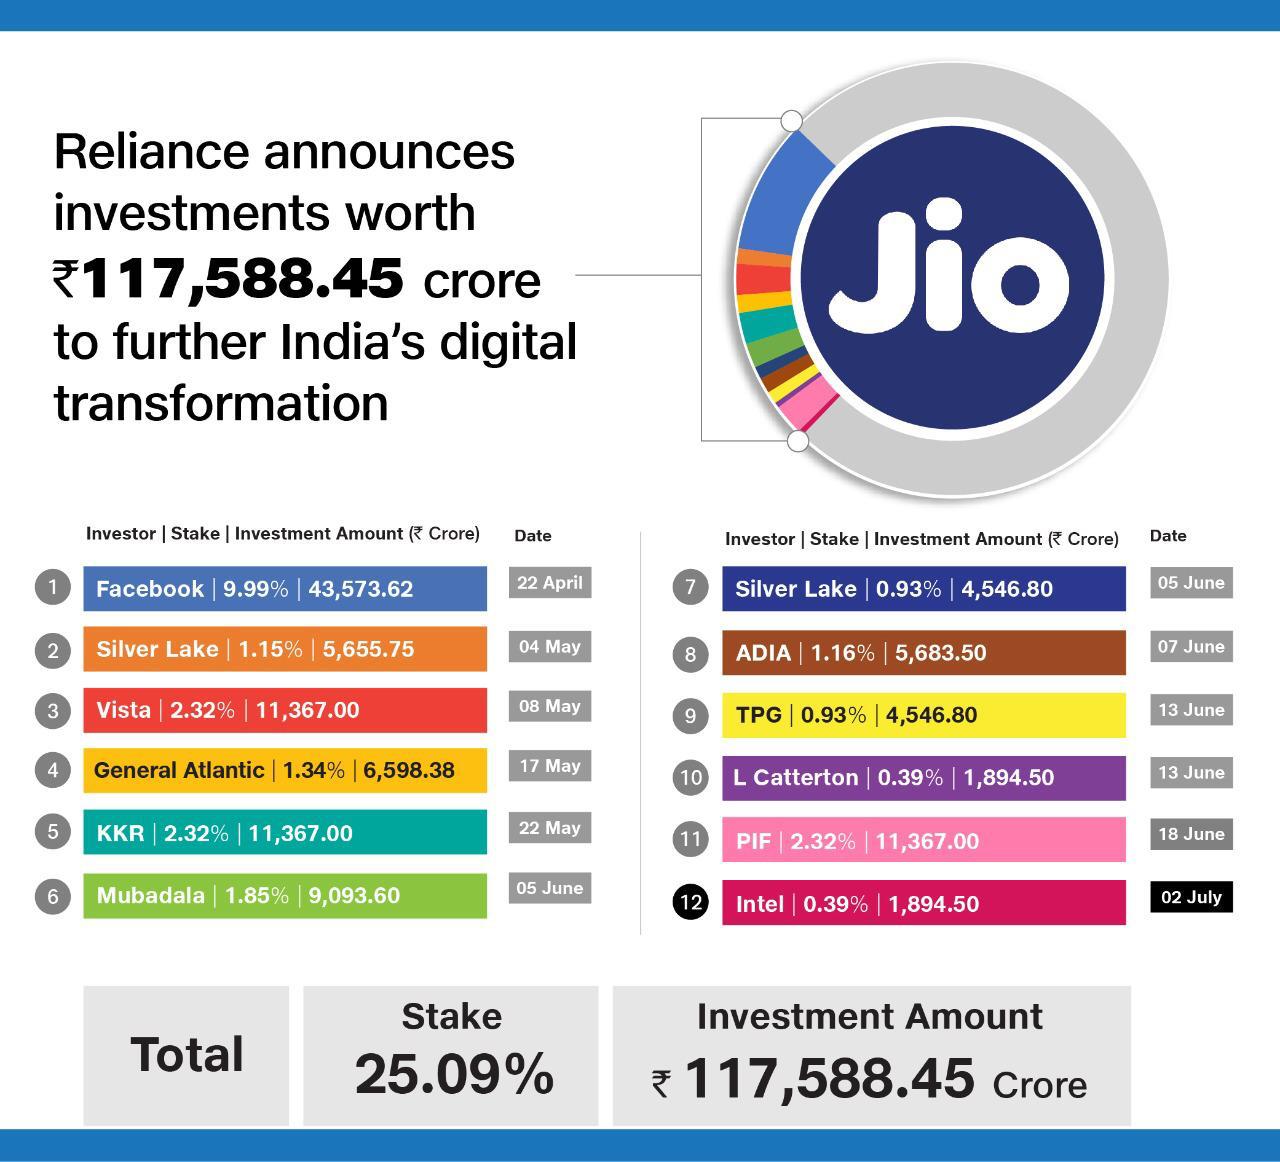 Intel capital to invest Rs. 1,894.50 crore in Jio platforms